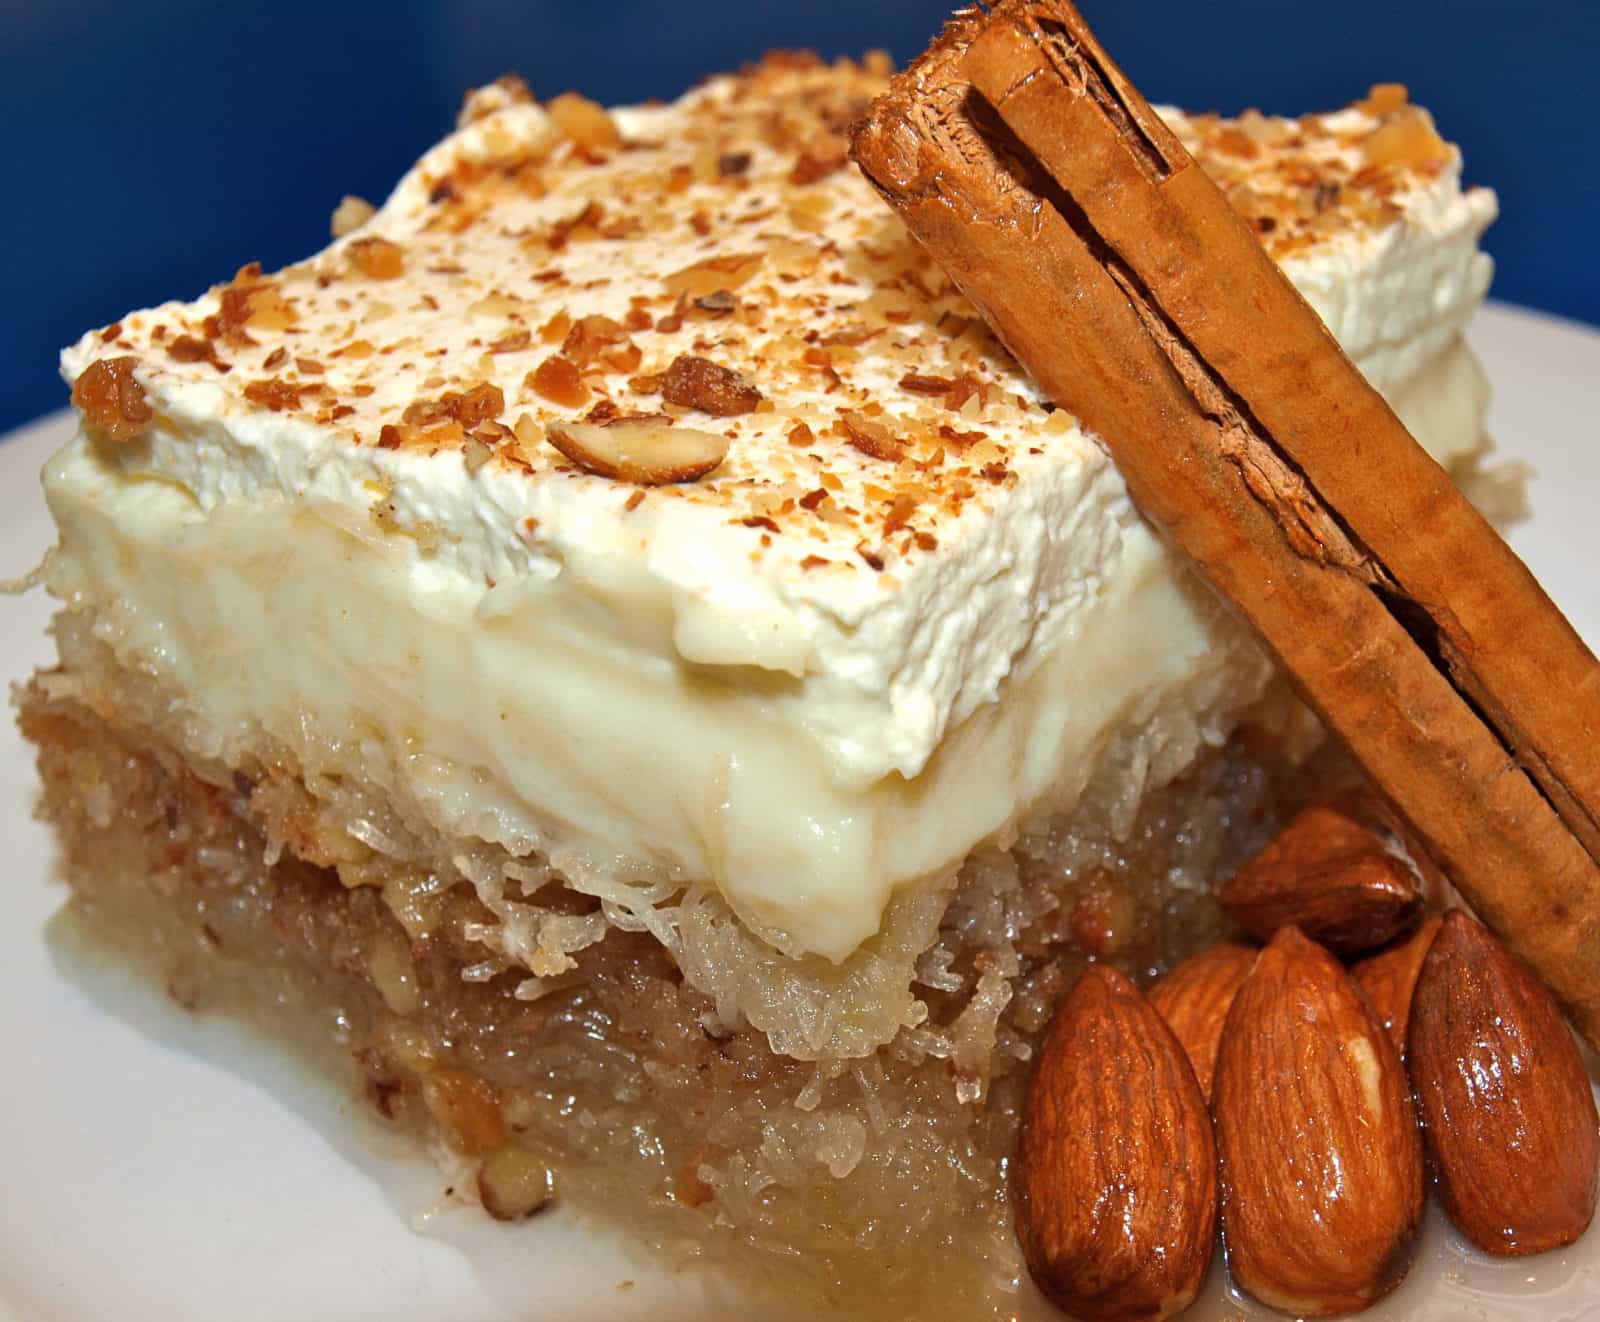 roasted kataifi with almonds, syrup then covered with a traditional custard and fresh cream